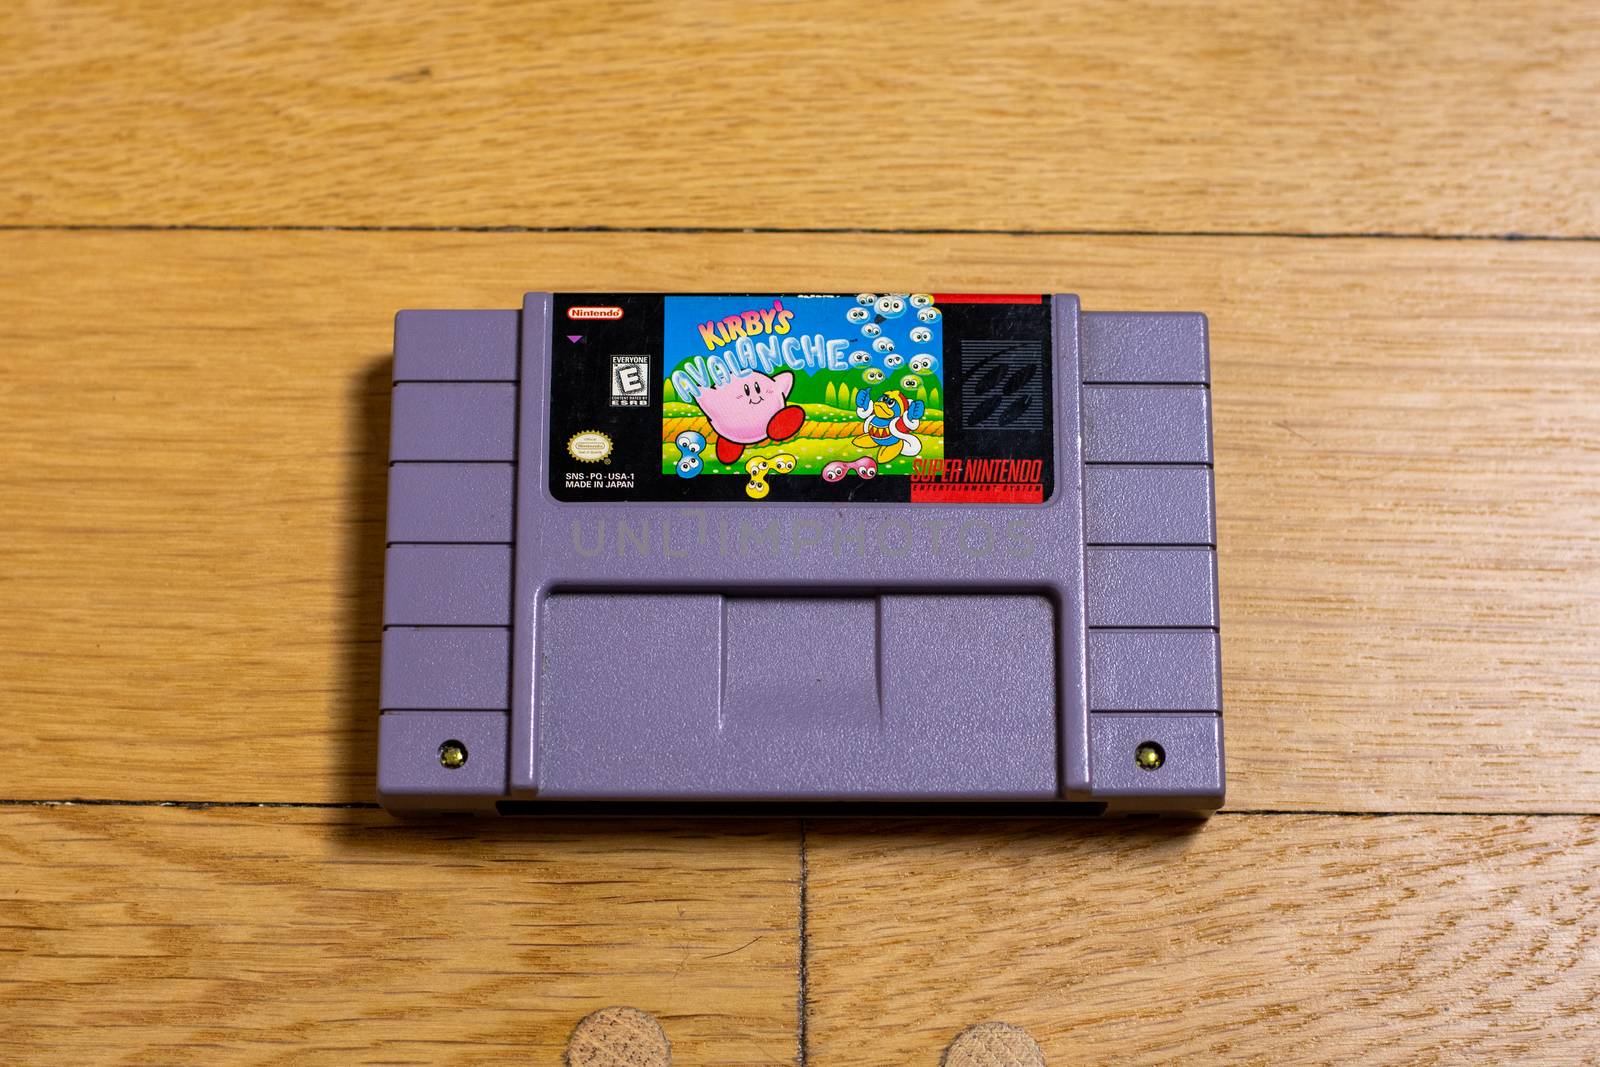 A Kirby's Avalanche Cartridge for the Super Nintendo Entertainment System on a wood floor.